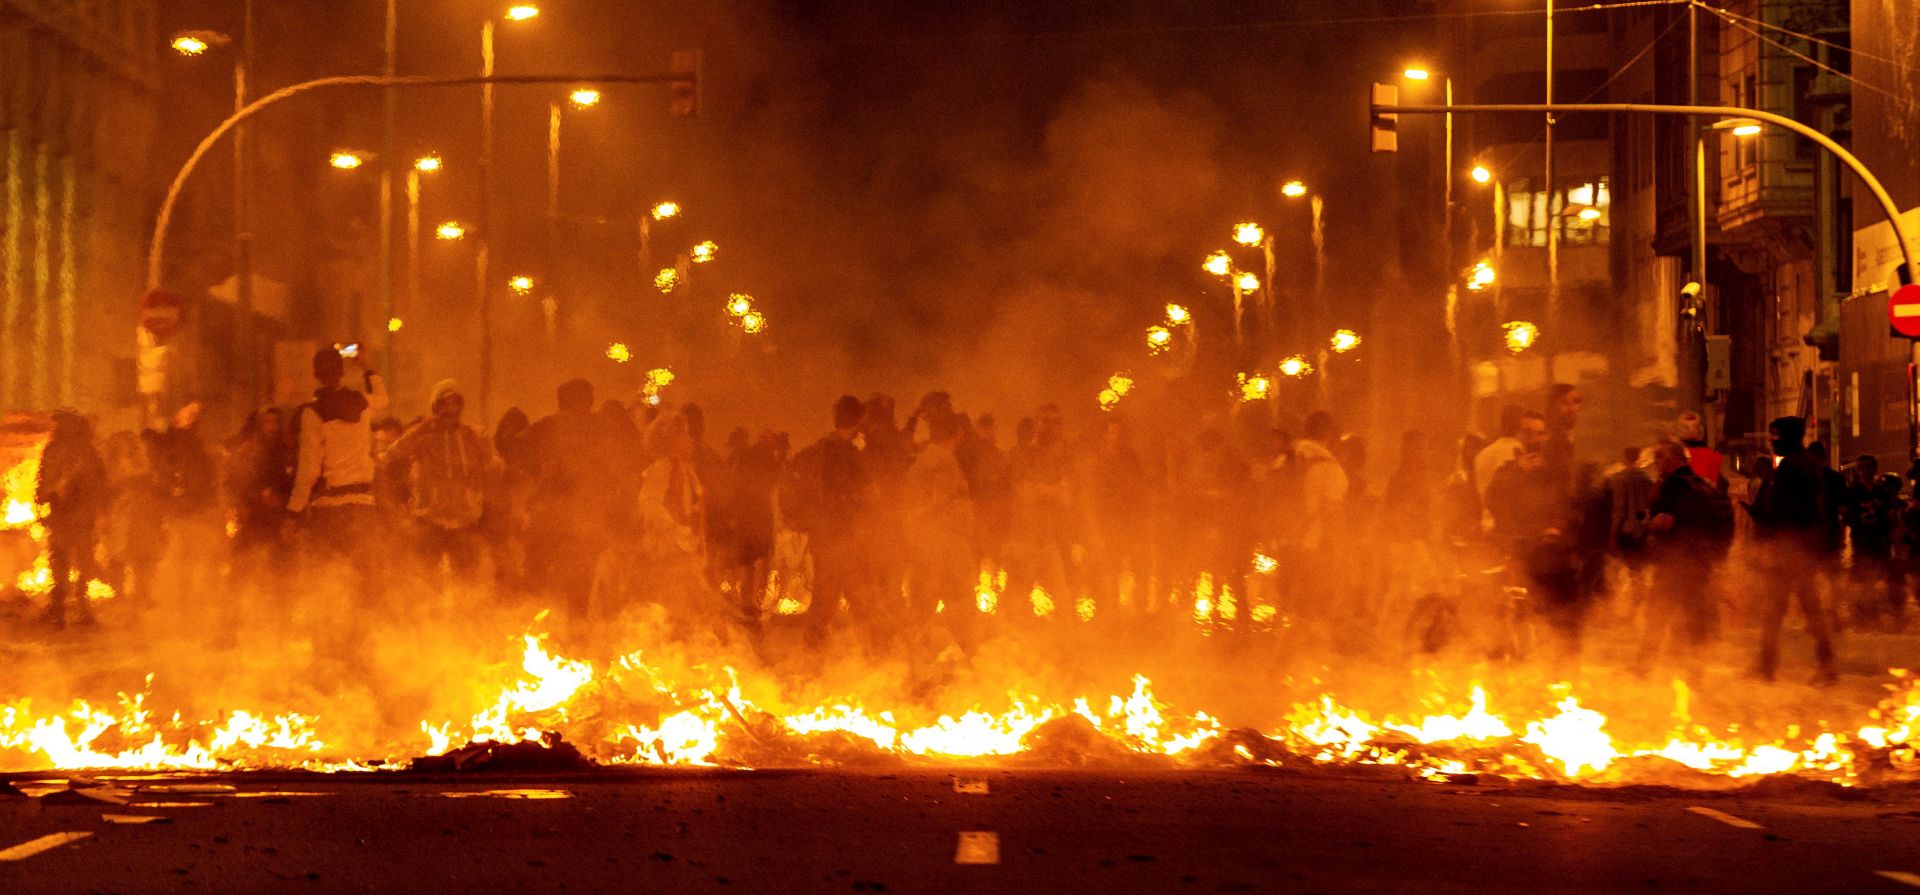 epa07923746 Protesters create a burning barricade during a rally against the sentence ruled by Supreme Court on 'proces' trial' in downtown Barcelona, Catalonia, Spain, 15 October 2019. Demonstrators are blocking some roads in Catalonia against the court's decision.The Spanish Supreme Court on 14 October 2019 issued a fresh European arrest warrant for the deposed former president following its sentencing of former Catalan Vice President Oriol Junqueras to 13 years in jail for sedition and misuse of public funds. Several other political leaders were also handed multi-year prison sentences for their roles in holding a failed independence vote in 2017.  EPA/ENRIC FONTCUBERTA